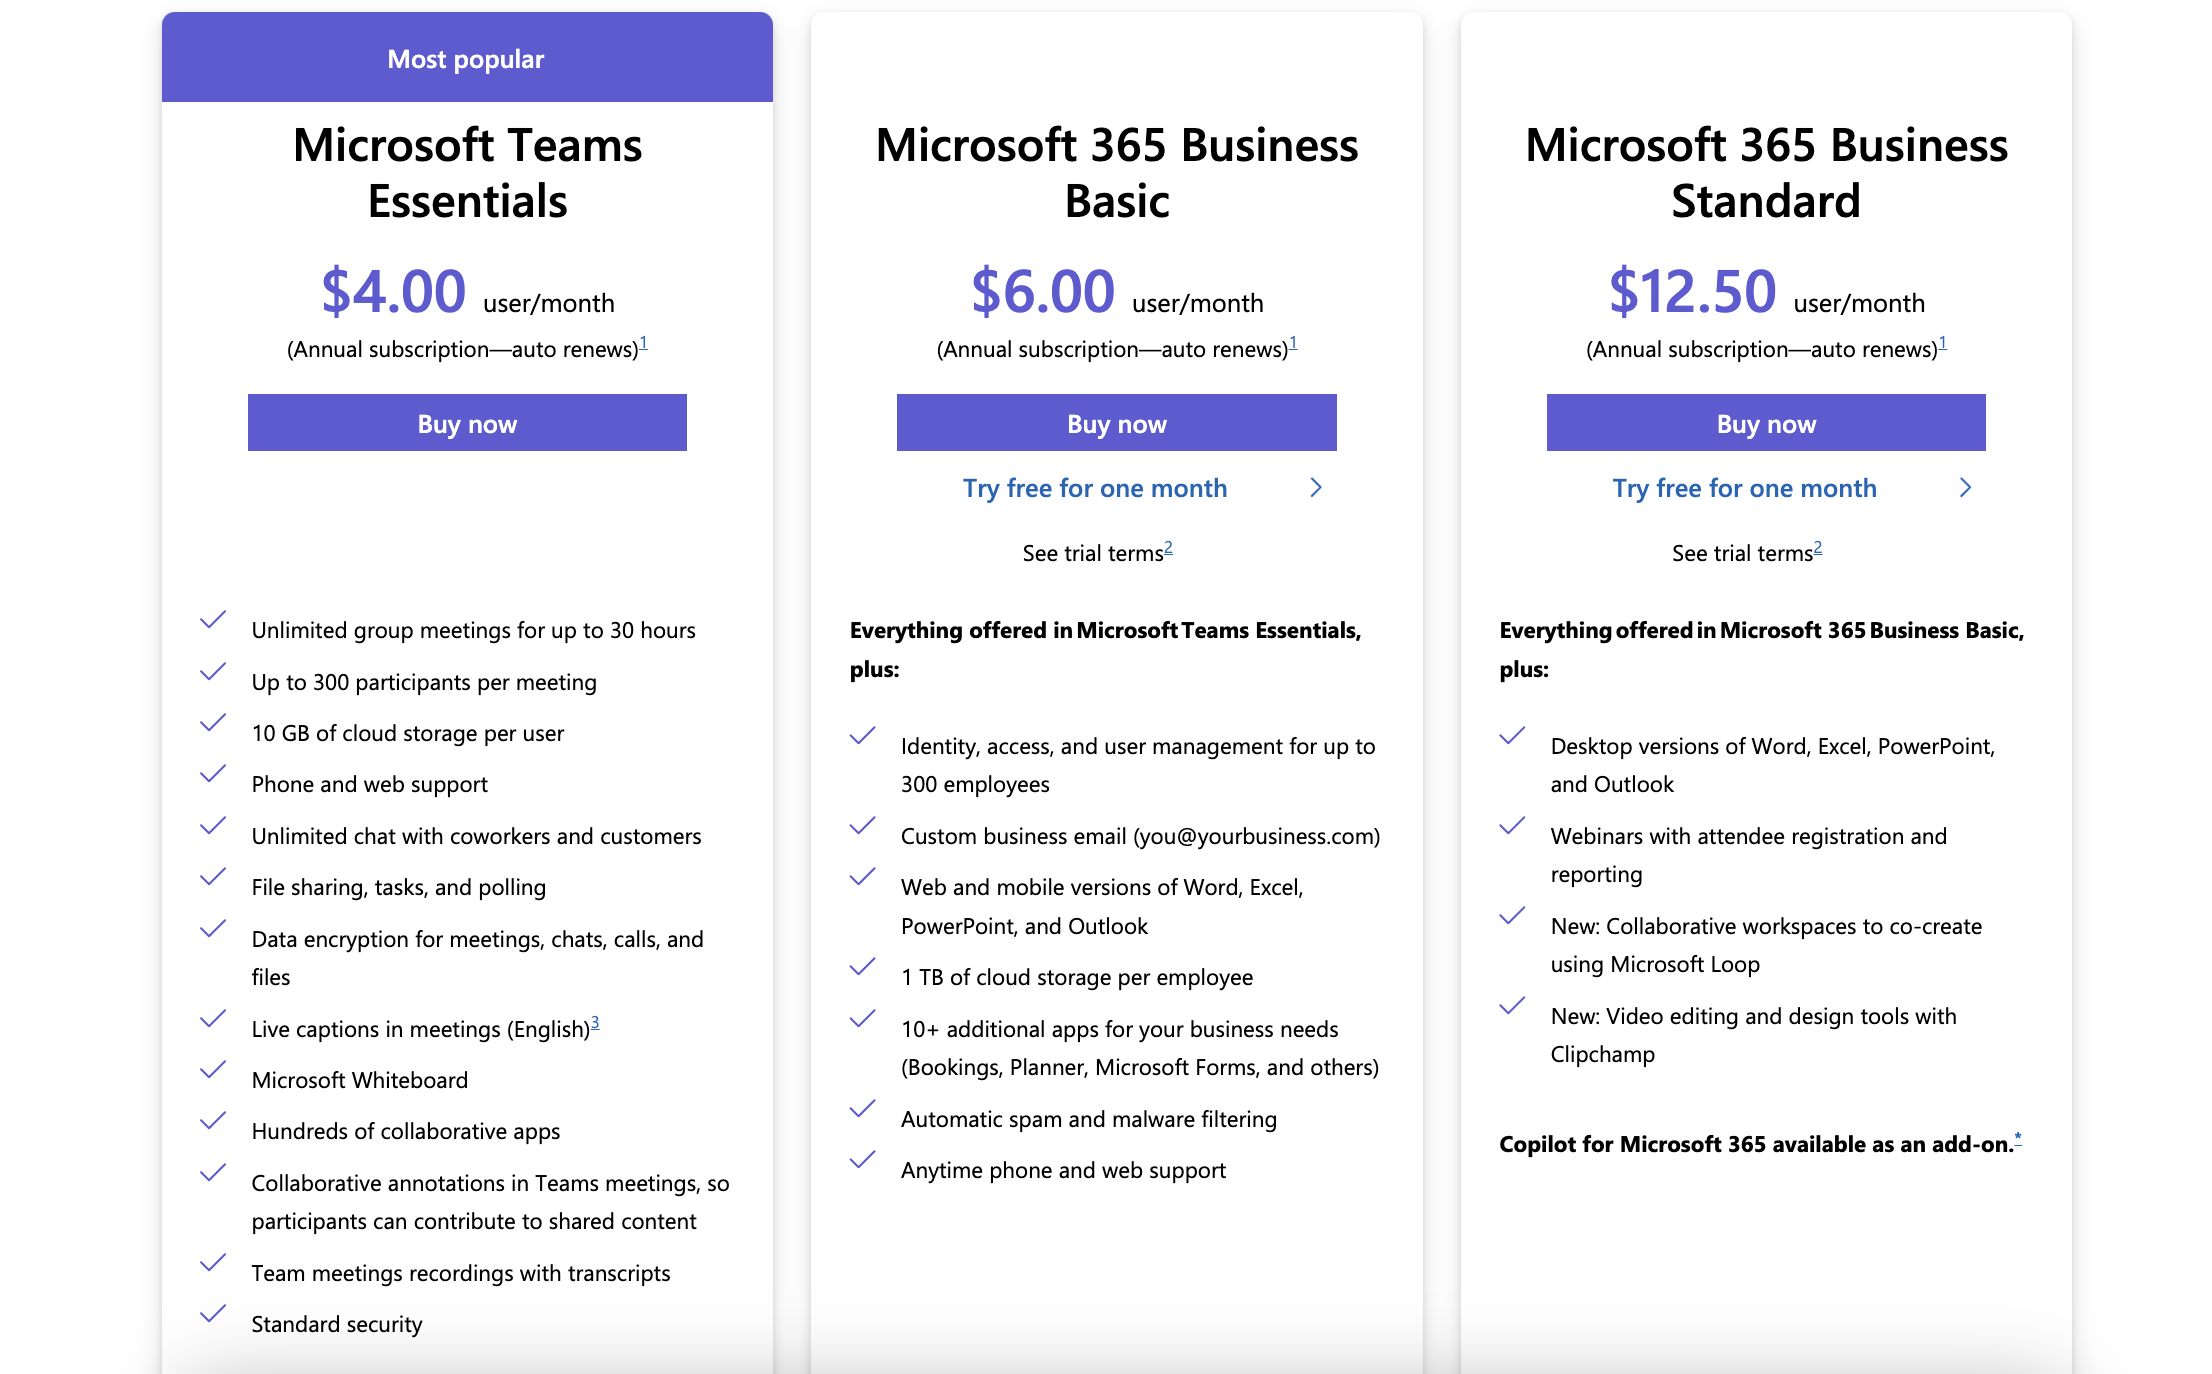 Microsoft Teams’ Business plans pricing